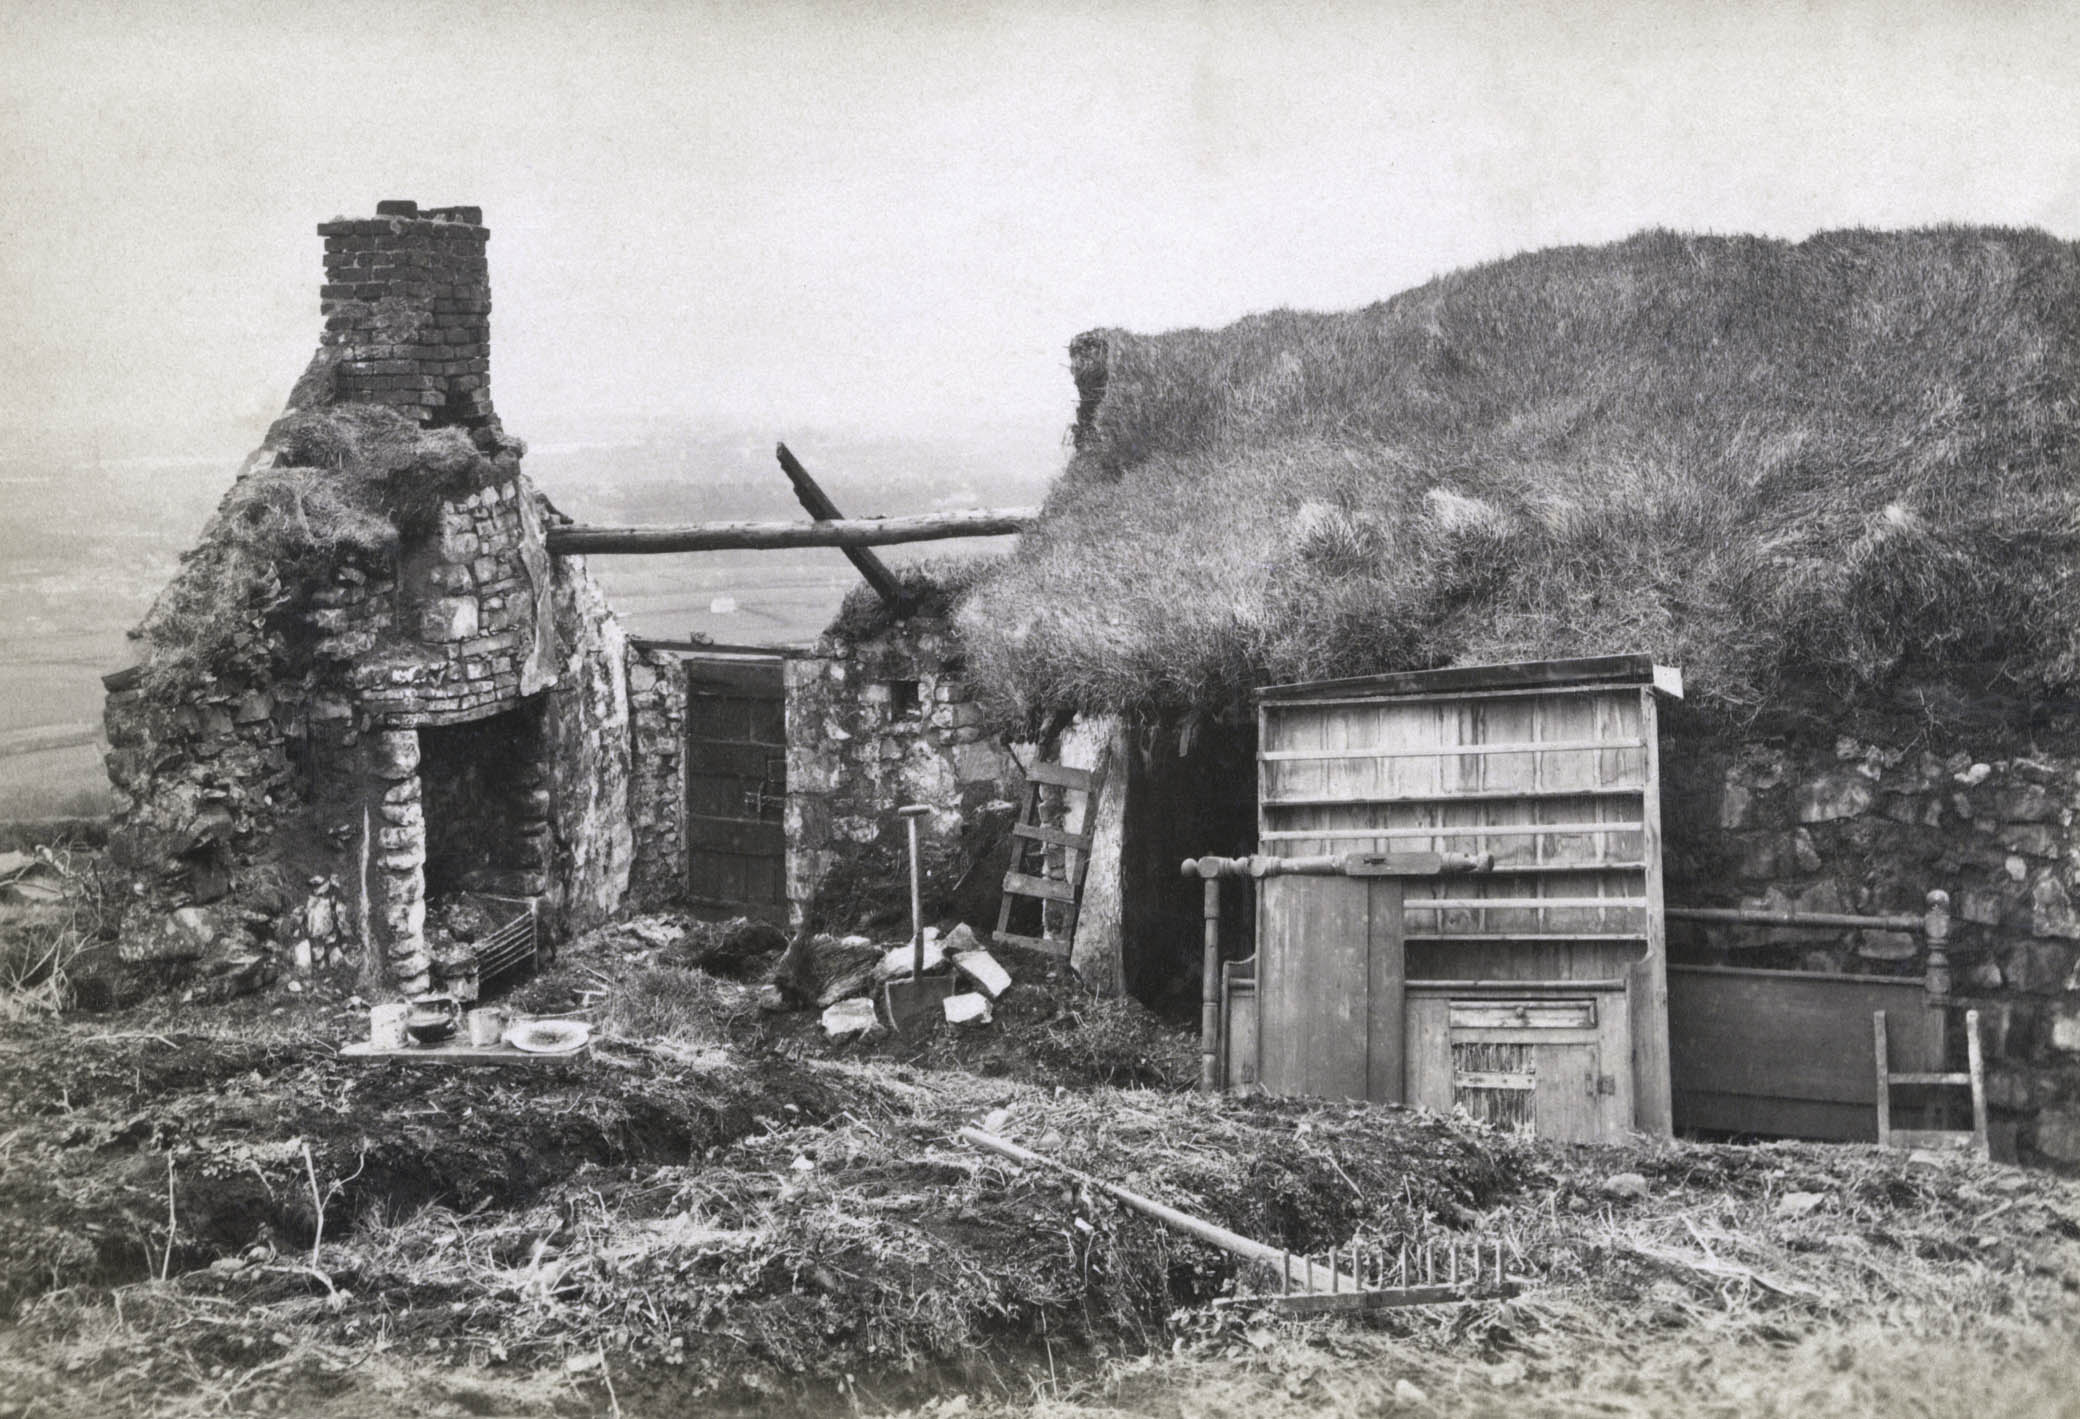 The ruins of a house following an eviction, c. 1888.